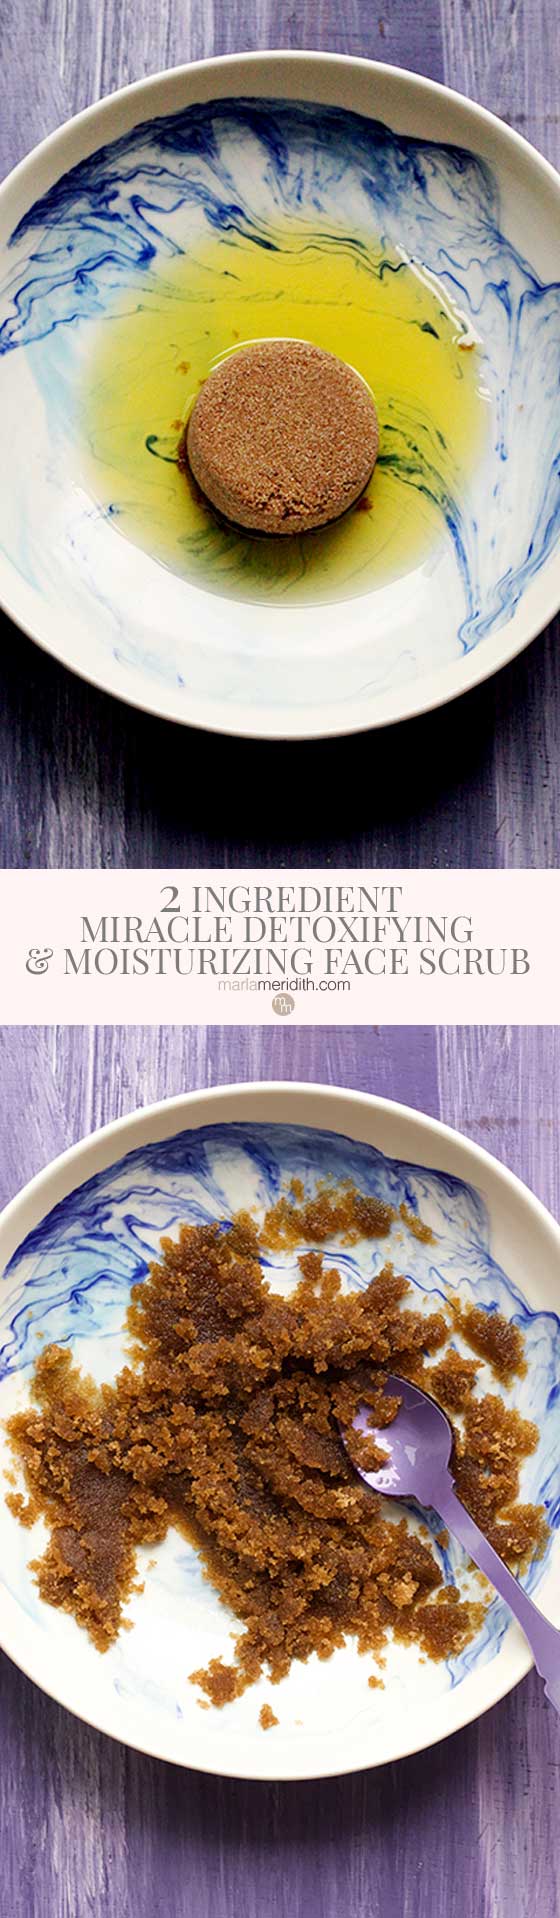 2 Ingredient Miracle Detoxifying & Moisturizing Face Scrub: This all-natural homemade face scrub helps to unclog pores, cleanses & moisturizes all at the same time! Use on lips, neck, face, body. Tastes good too!!  MarlaMeridith.com